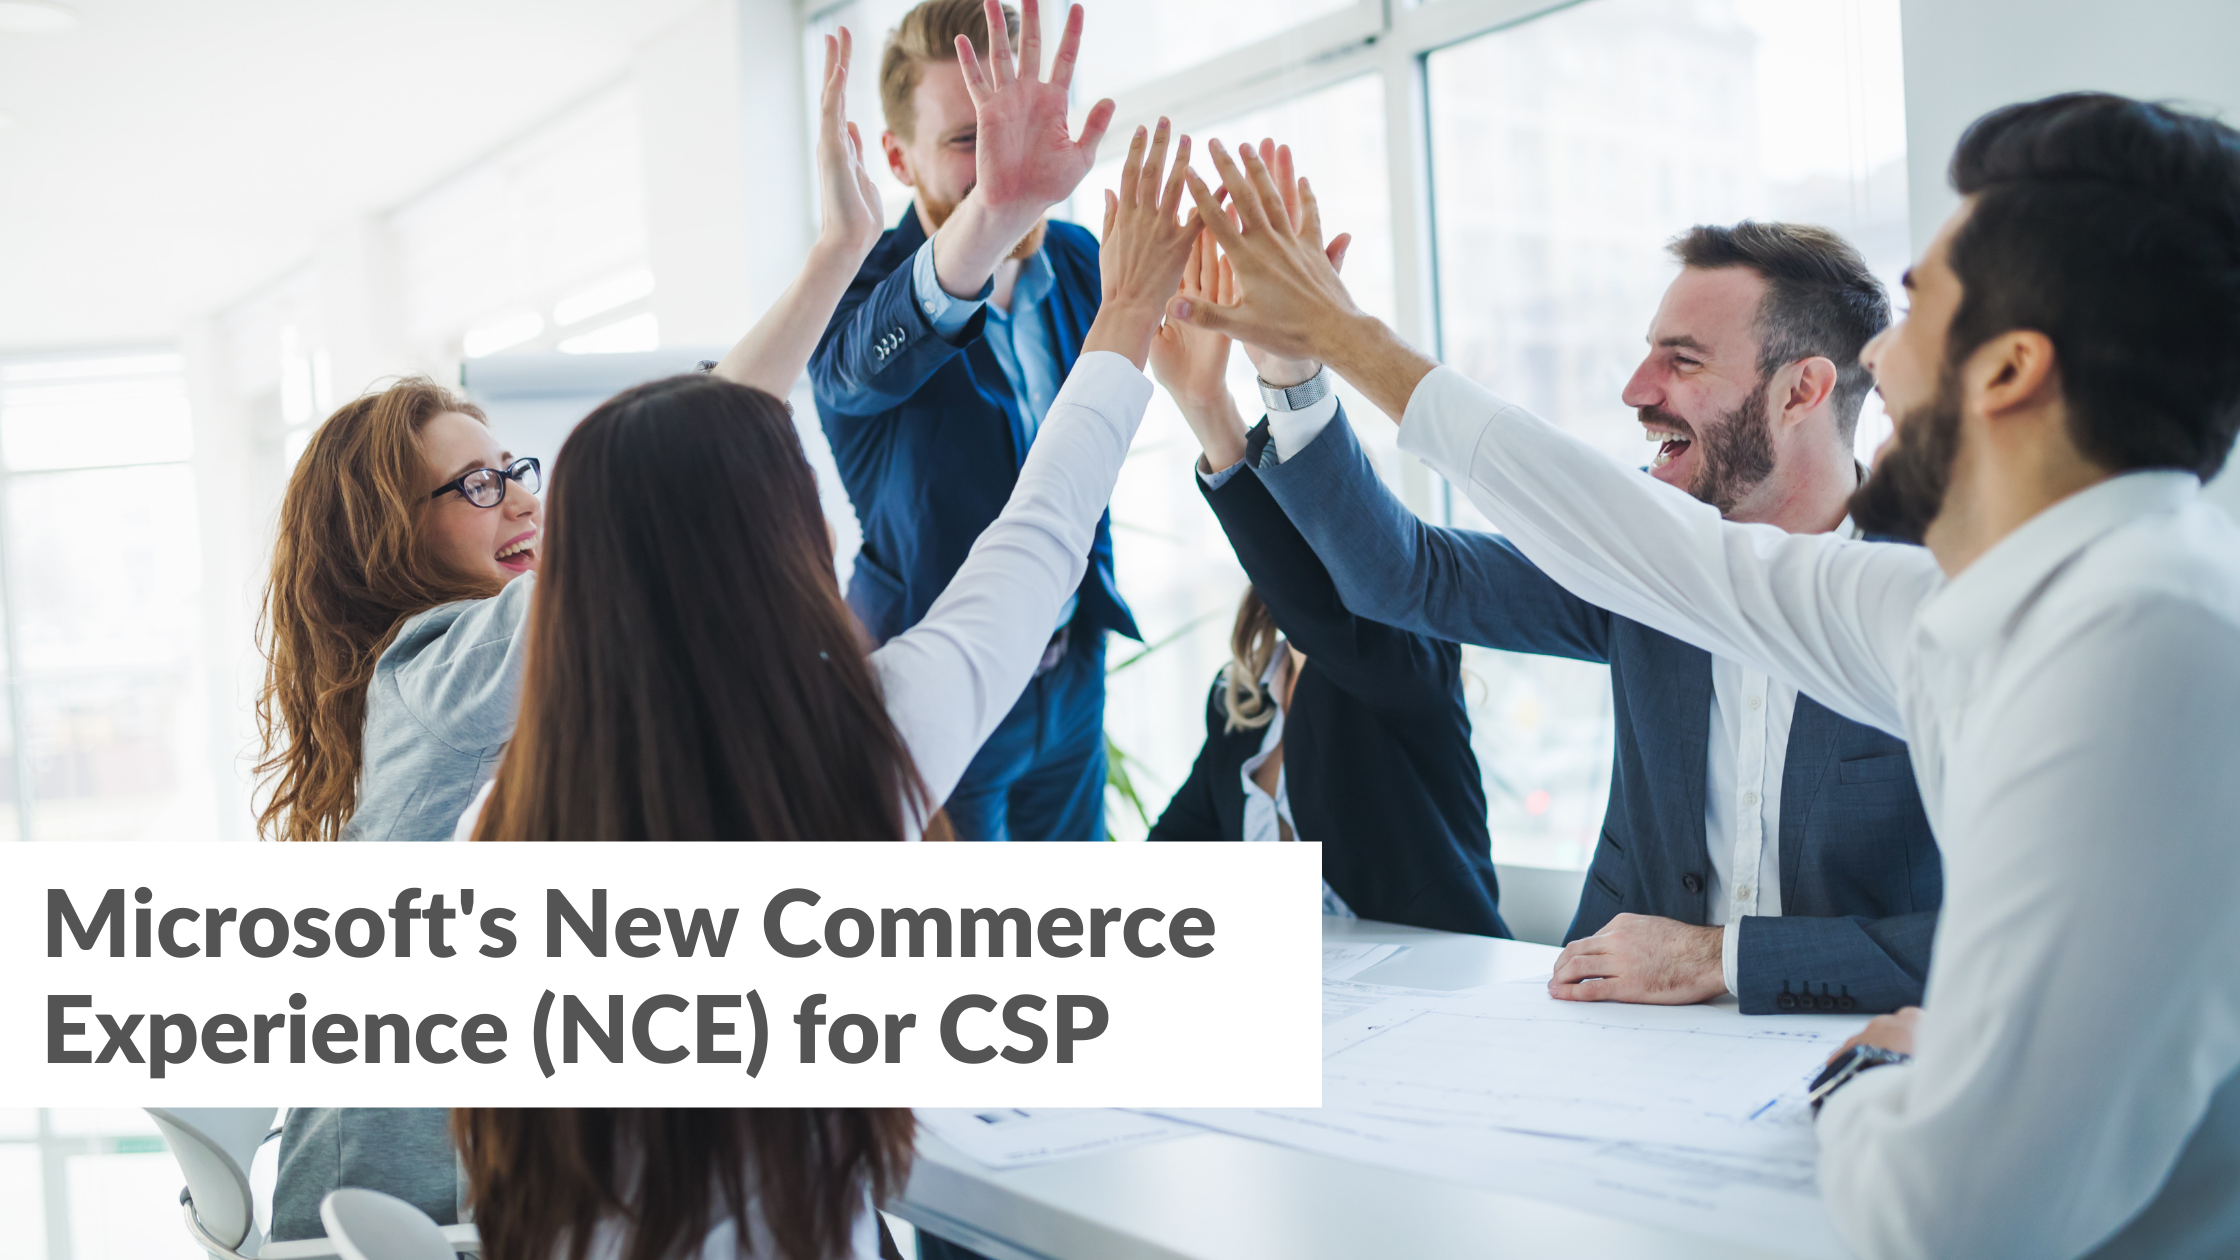 Microsoft's New Commerce Experience (NCE) for CSP